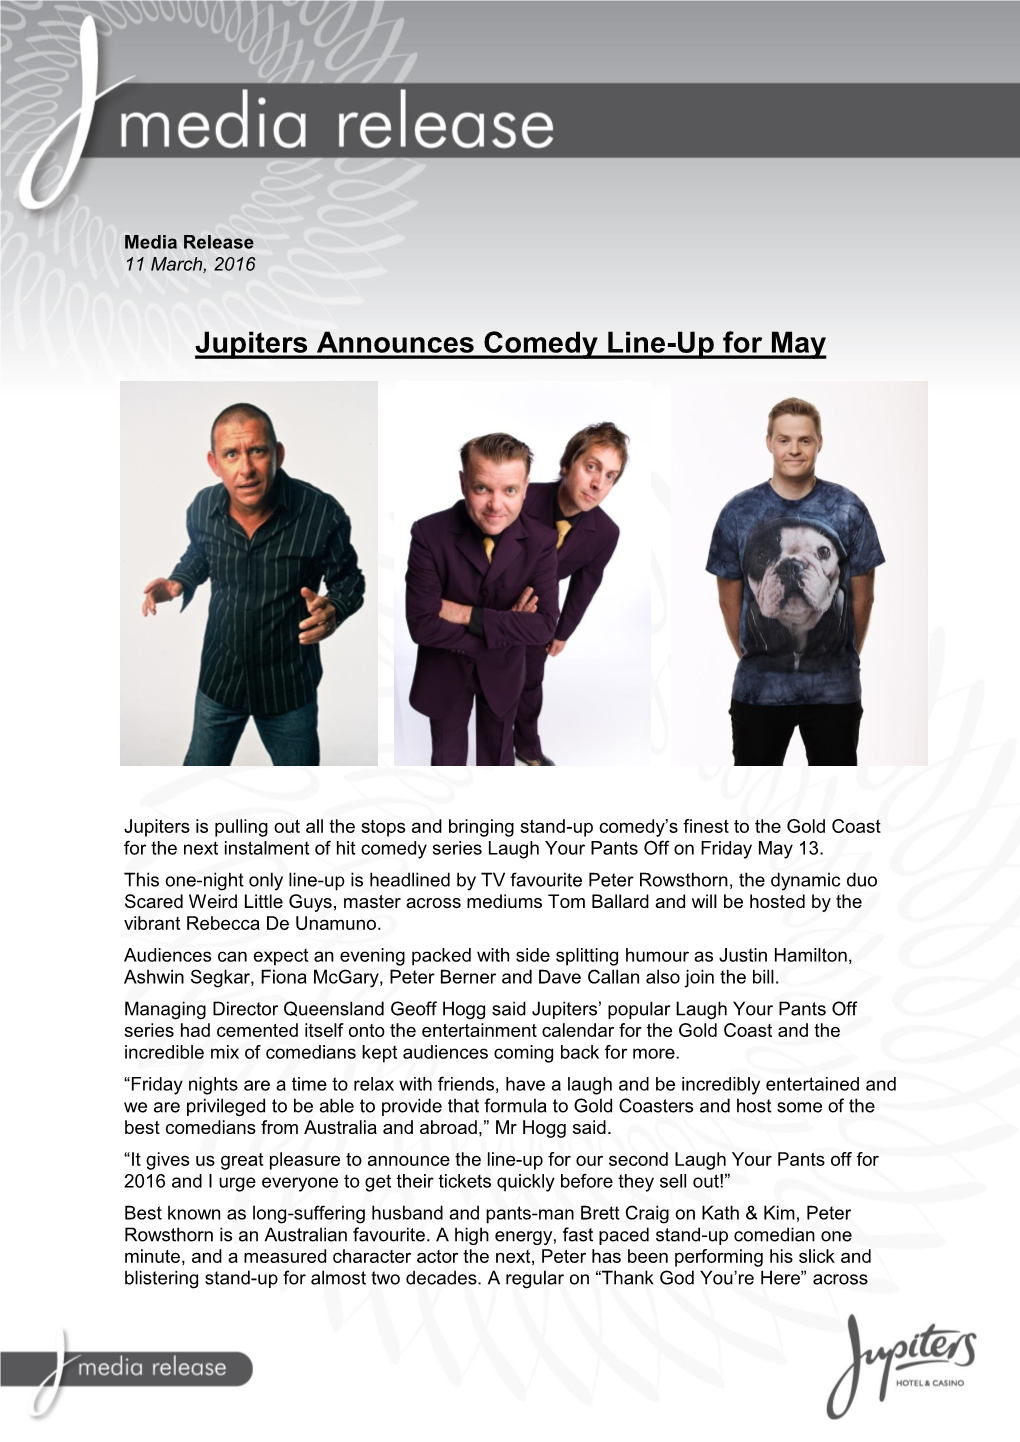 Jupiters Gold Coast Announces Comedy Line-Up For